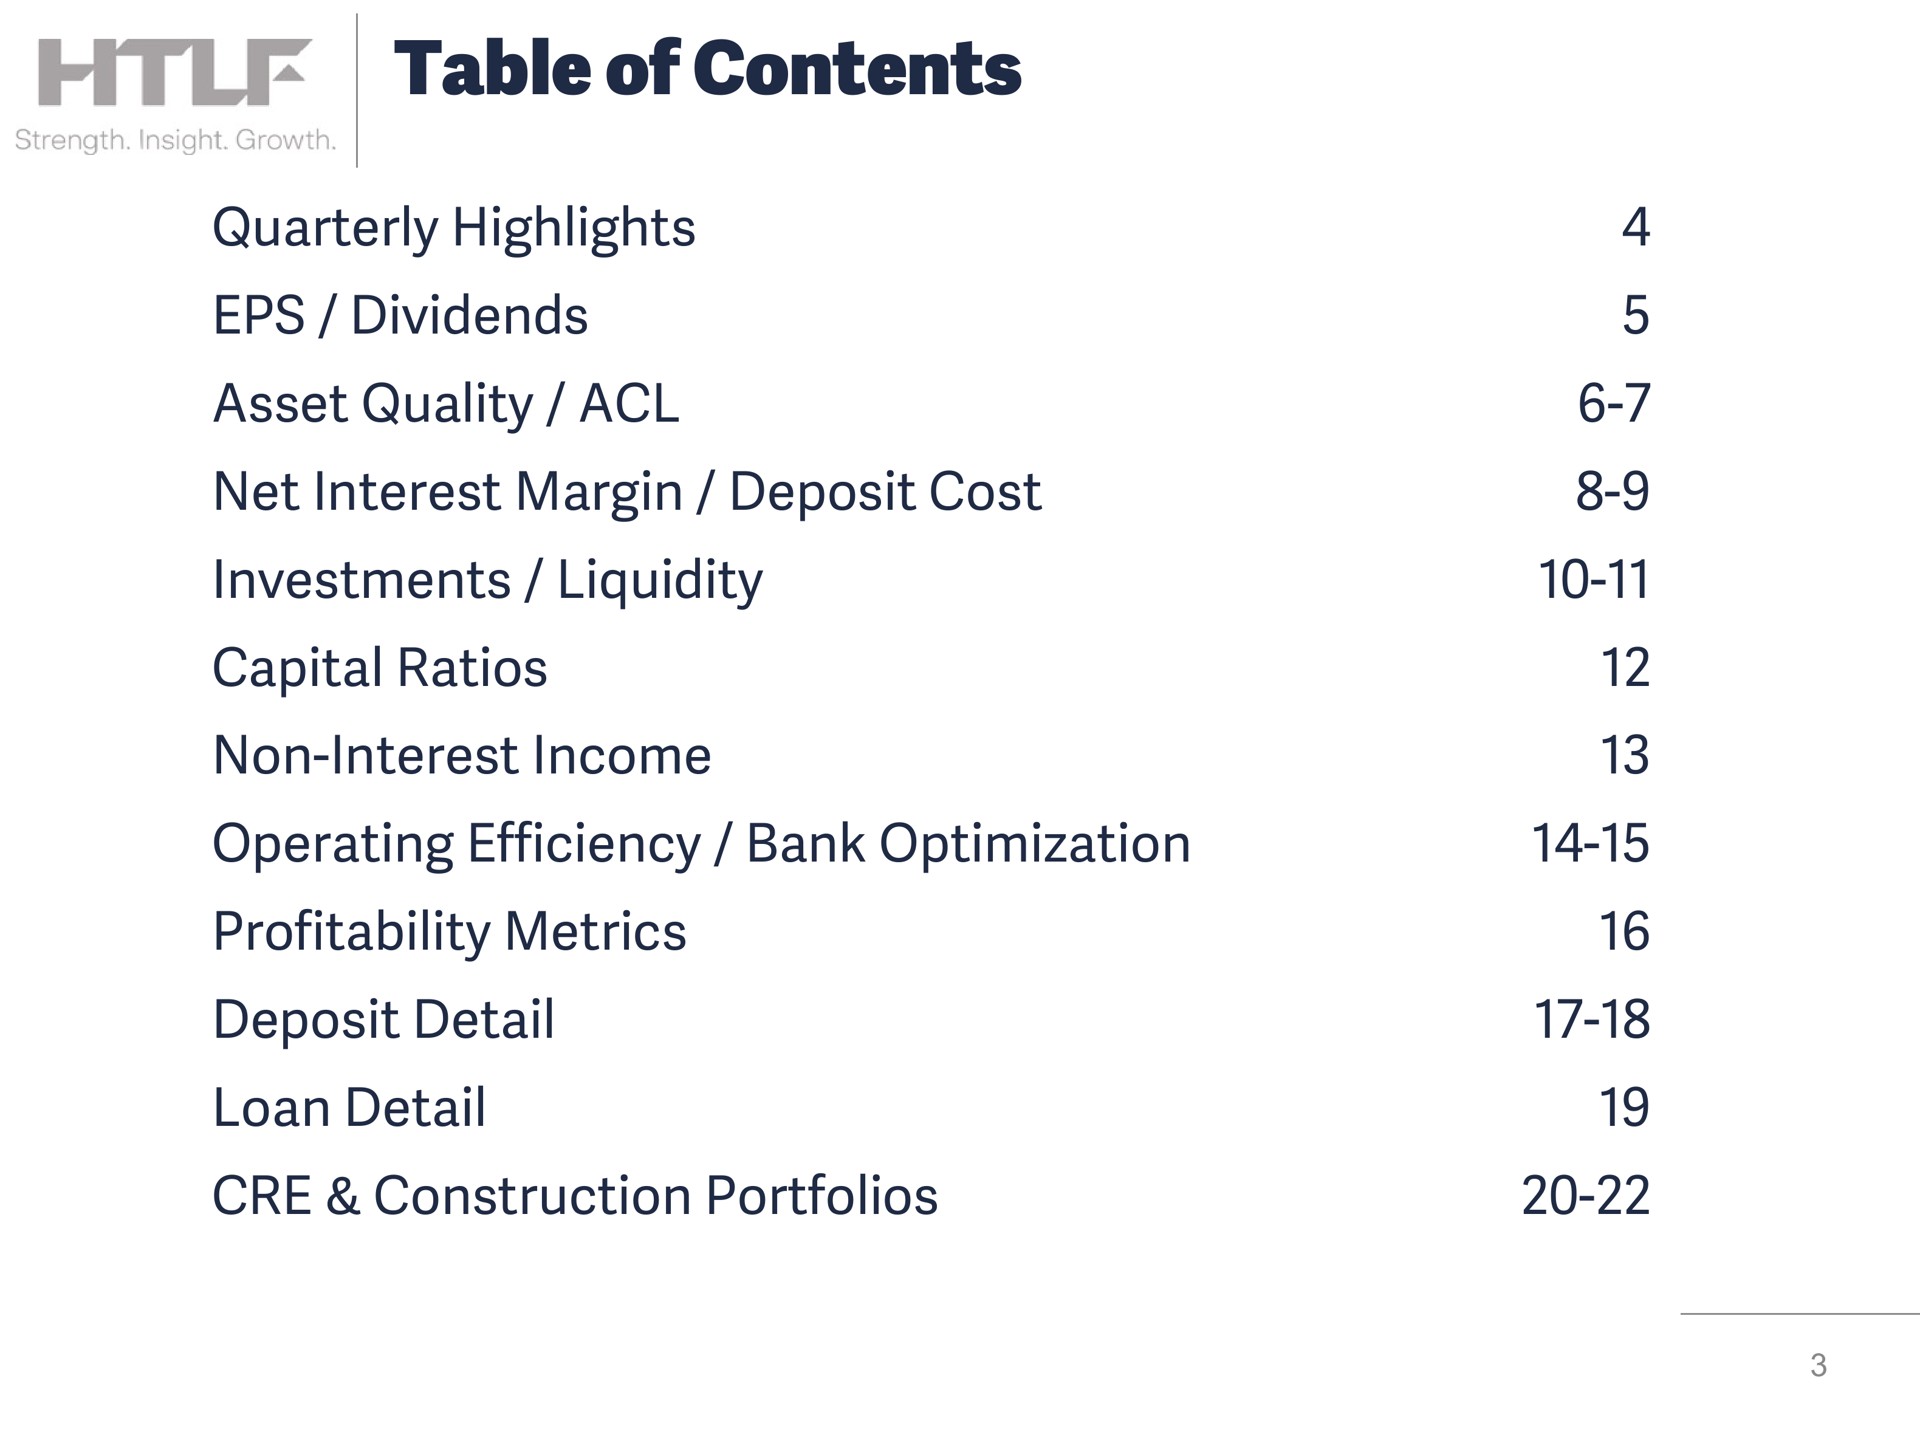 table of contents quarterly highlights dividends asset quality net interest margin deposit cost investments liquidity capital ratios non interest income operating efficiency bank optimization profitability metrics deposit detail loan detail construction portfolios | Heartland Financial USA